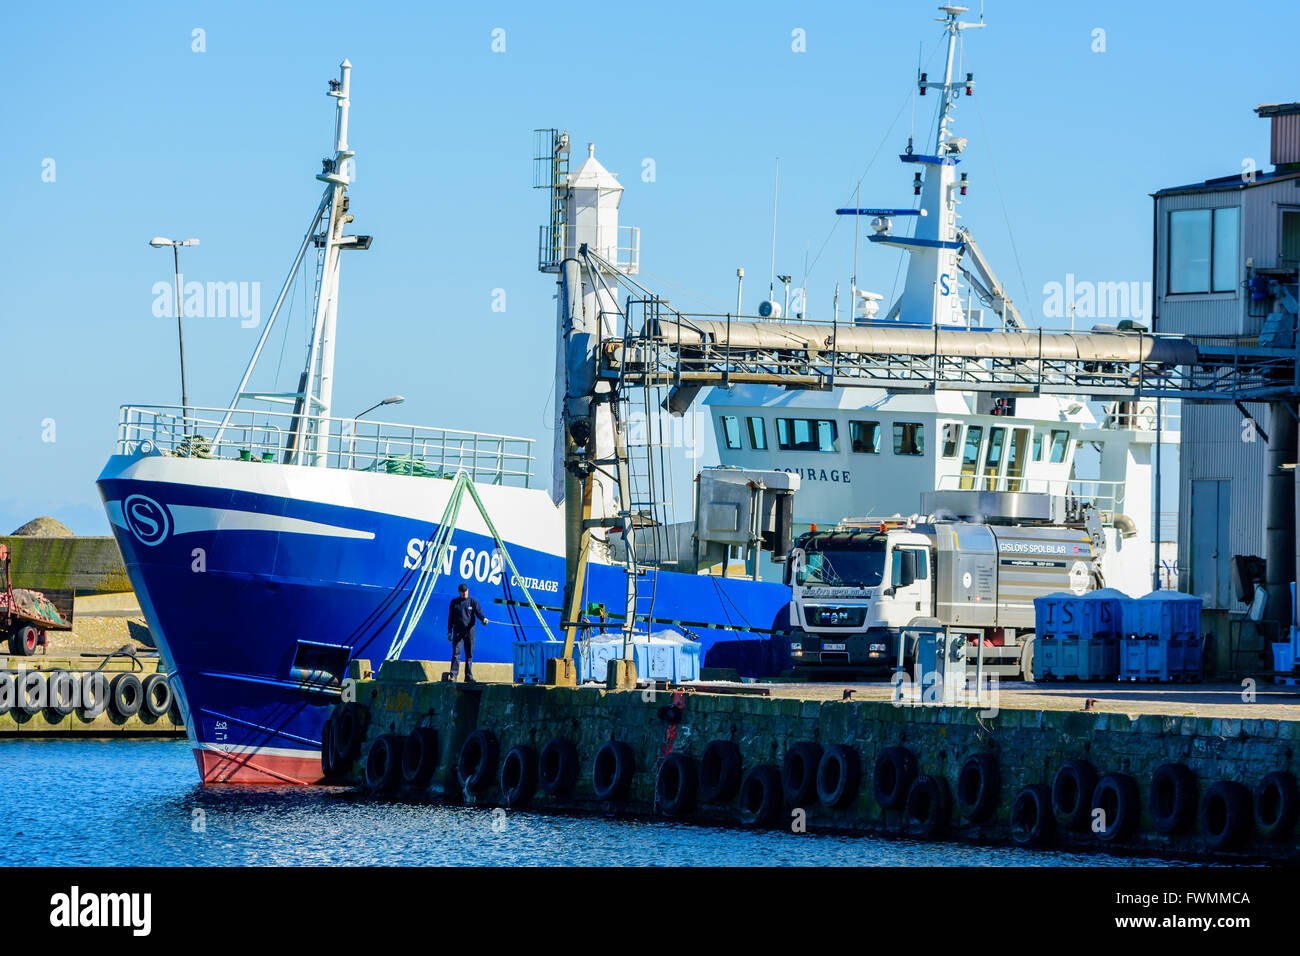 Simrishamn, Sweden - April 1, 2016: A man pull a rope to open the ice flow down to blue crates. Fishing boat behind him and a tr Stock Photo